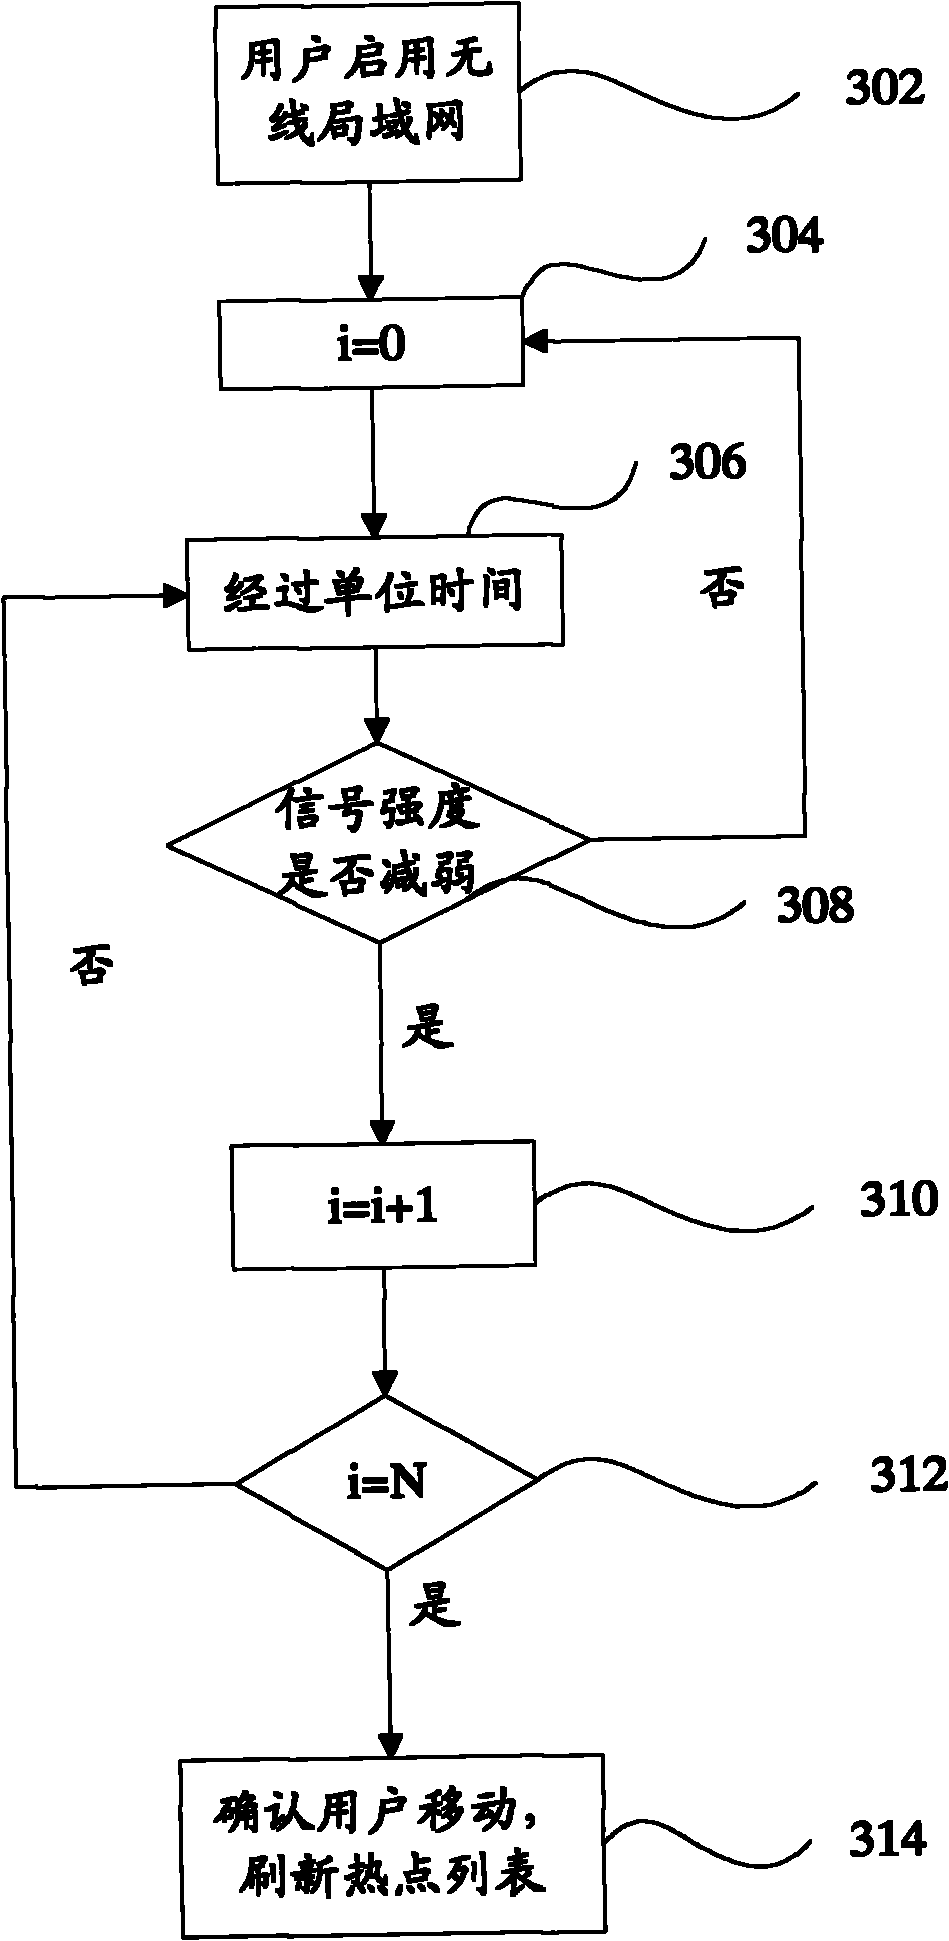 Method for switching hotspots in wireless local area network (WLAN) and terminal